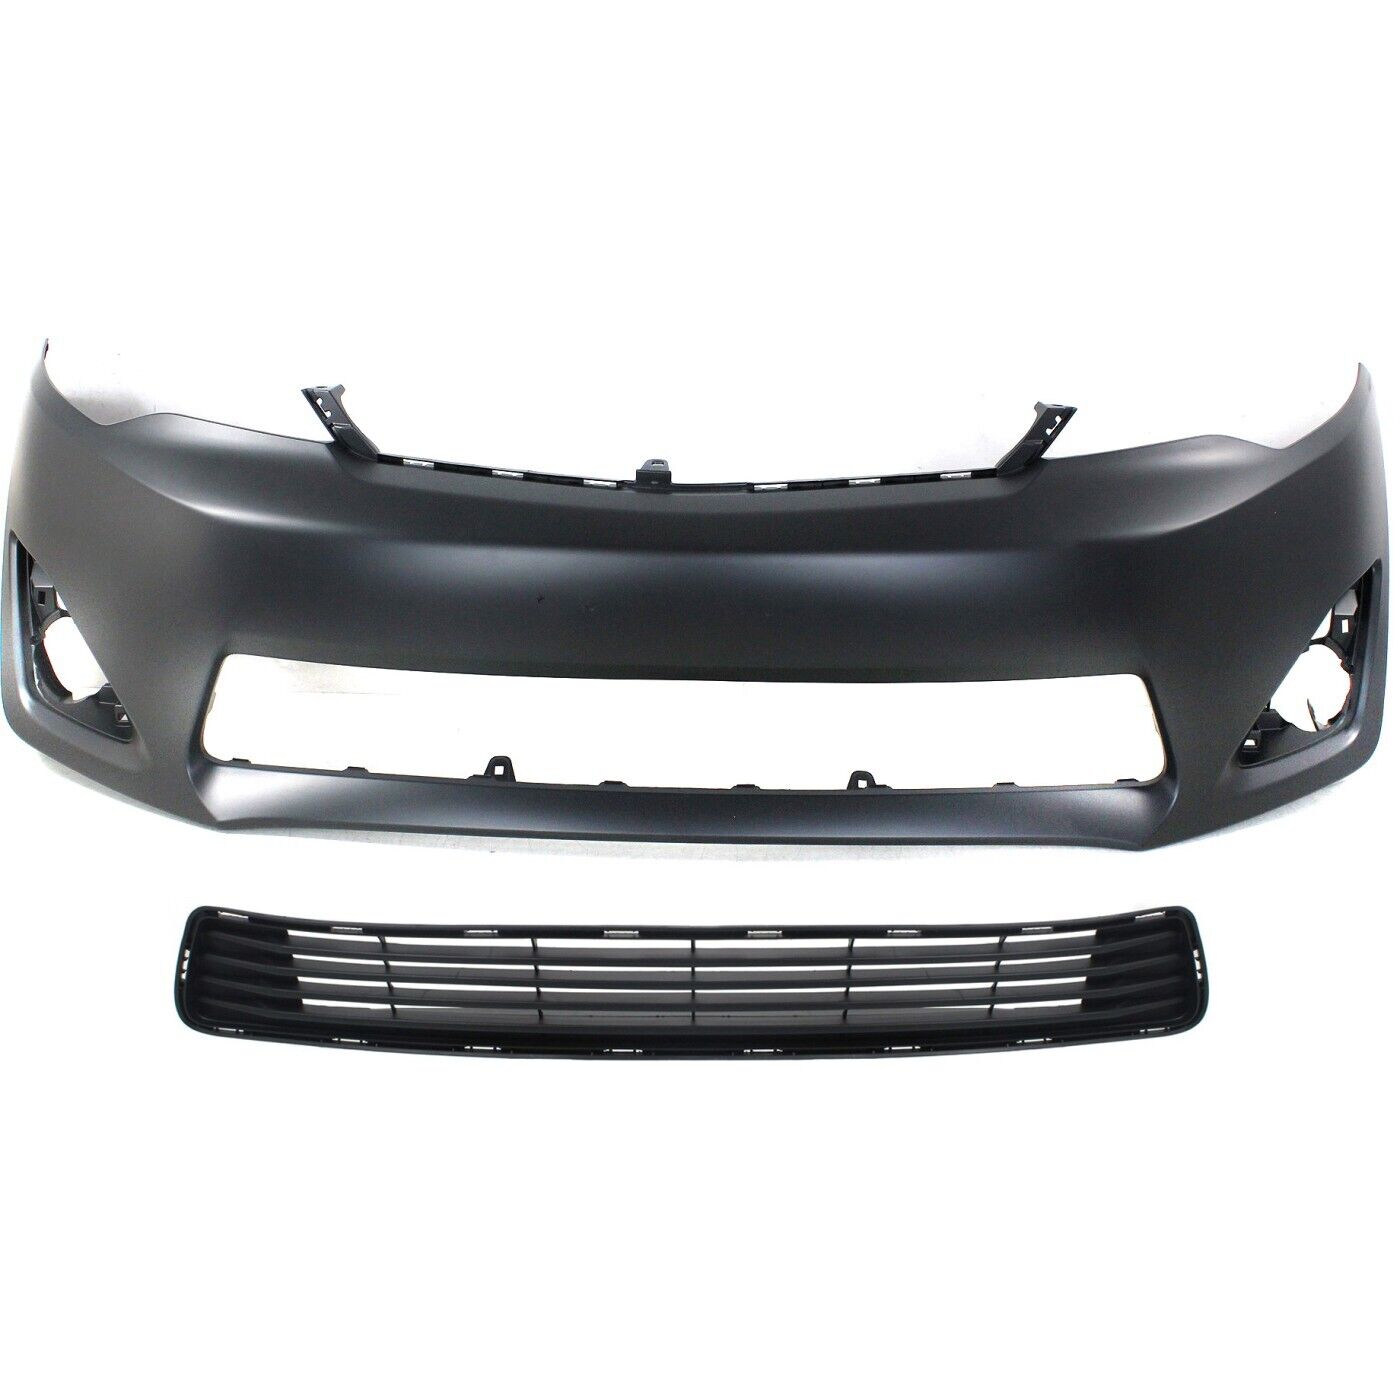 Bumper Cover Kit For 2012-2014 Toyota Camry Front With Bumper Grille Primed